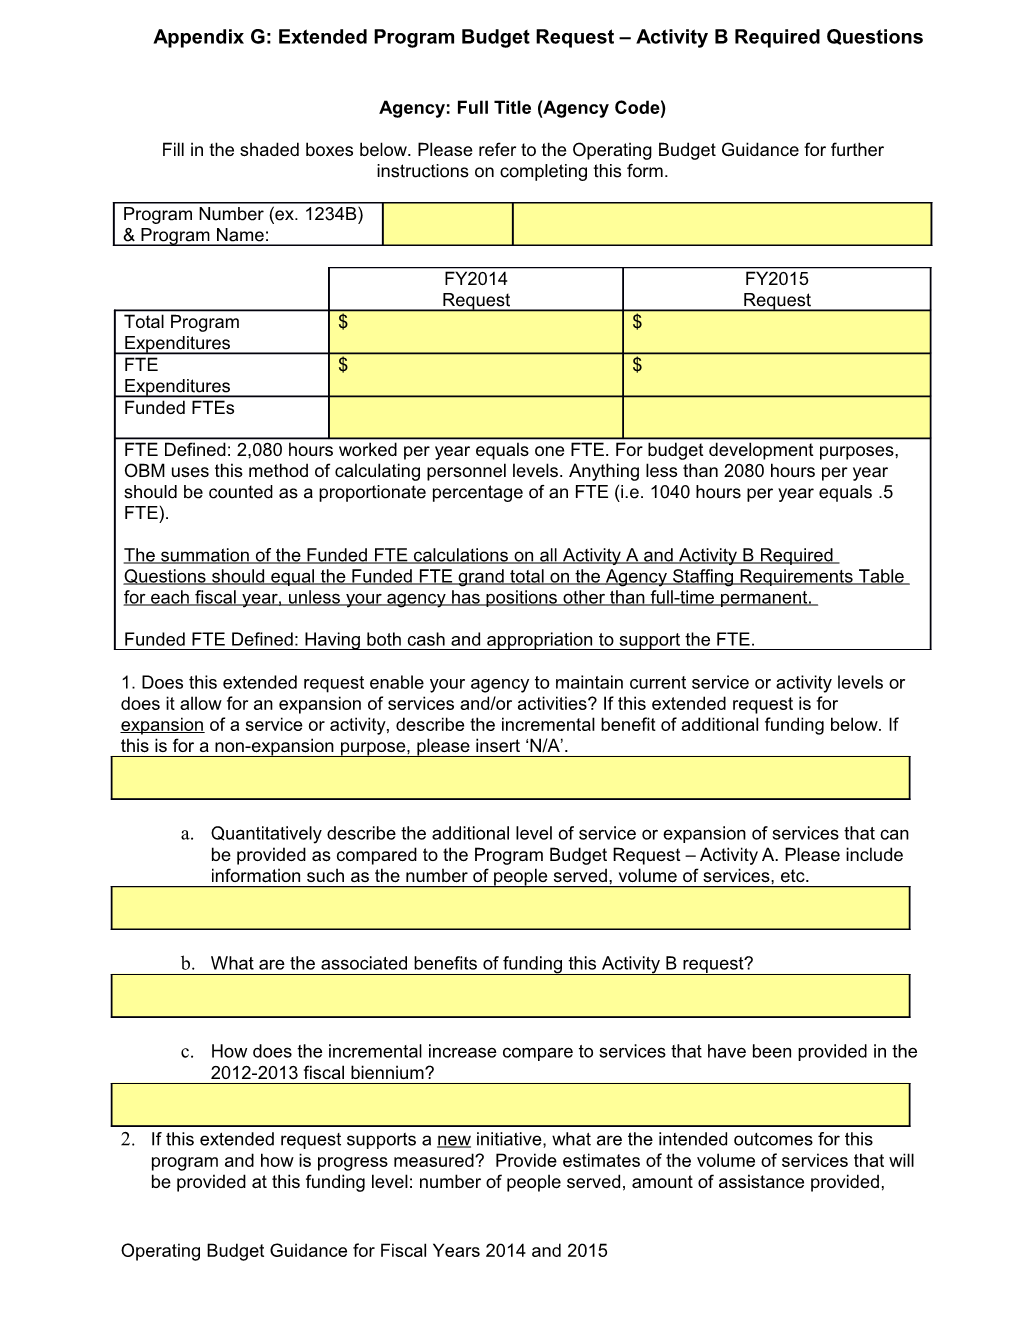 Appendix G: Extended Program Budget Request Activity B Required Questions